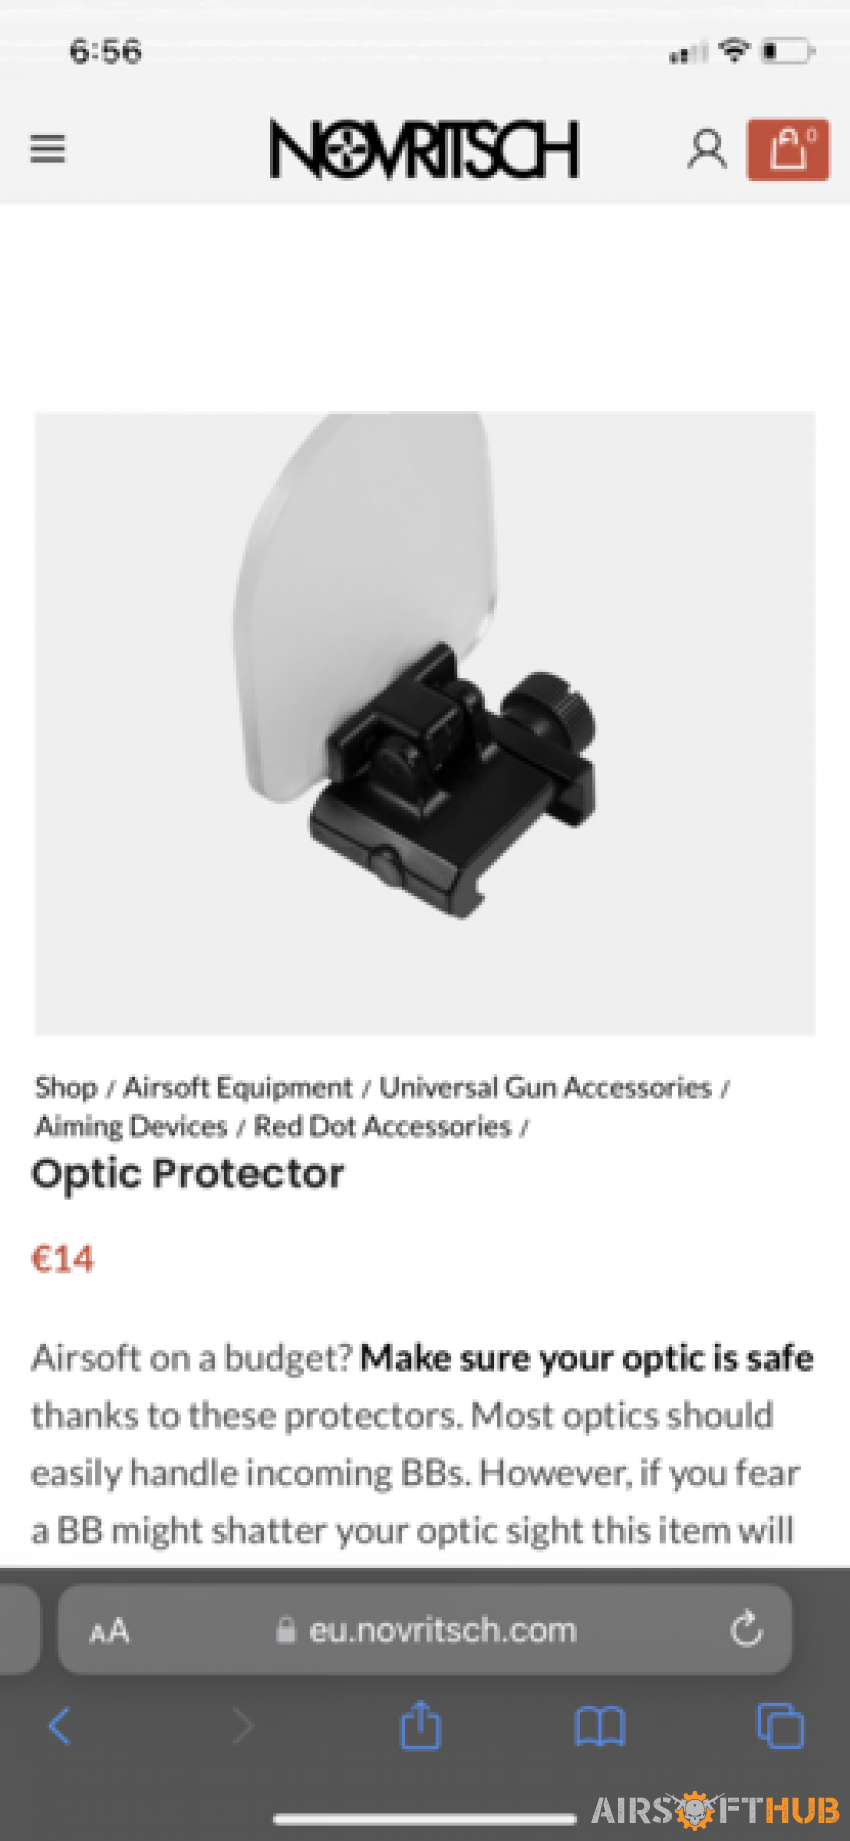 Optic protector - Used airsoft equipment